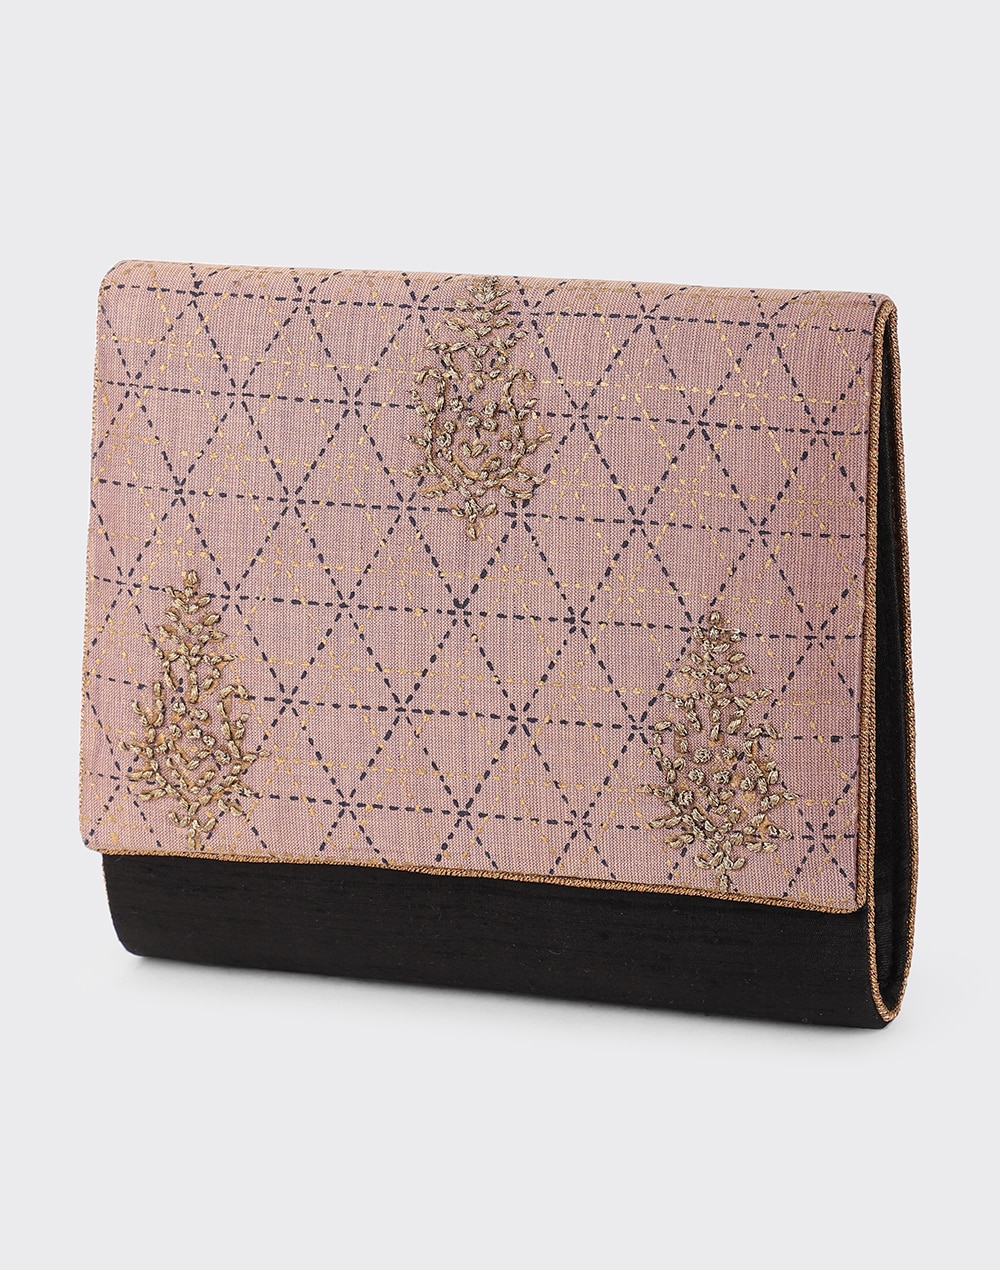 Fabric Embroidered Clutch Bag